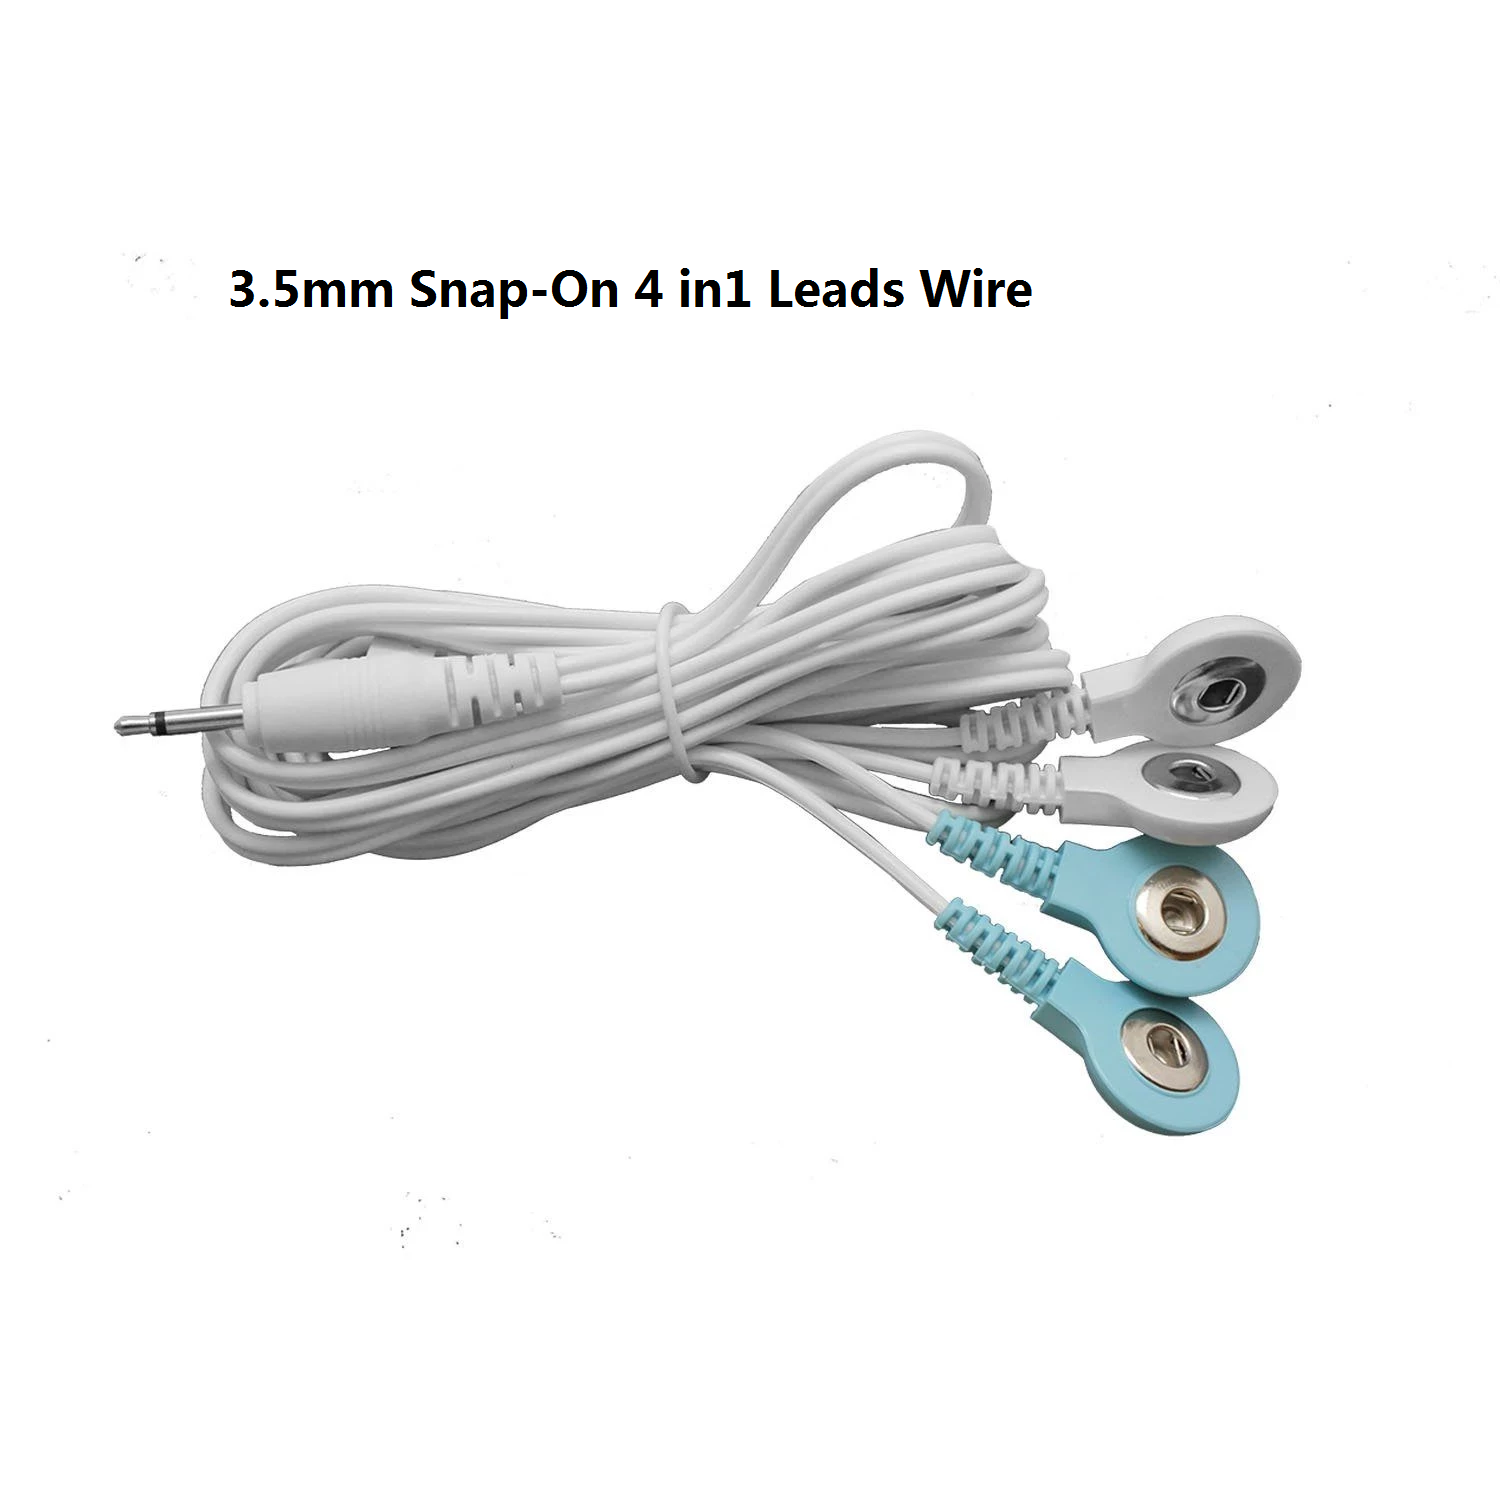 2 Sets of Snap-On 4 in 1 Leads Electrode Wires - HealthmateForever.com